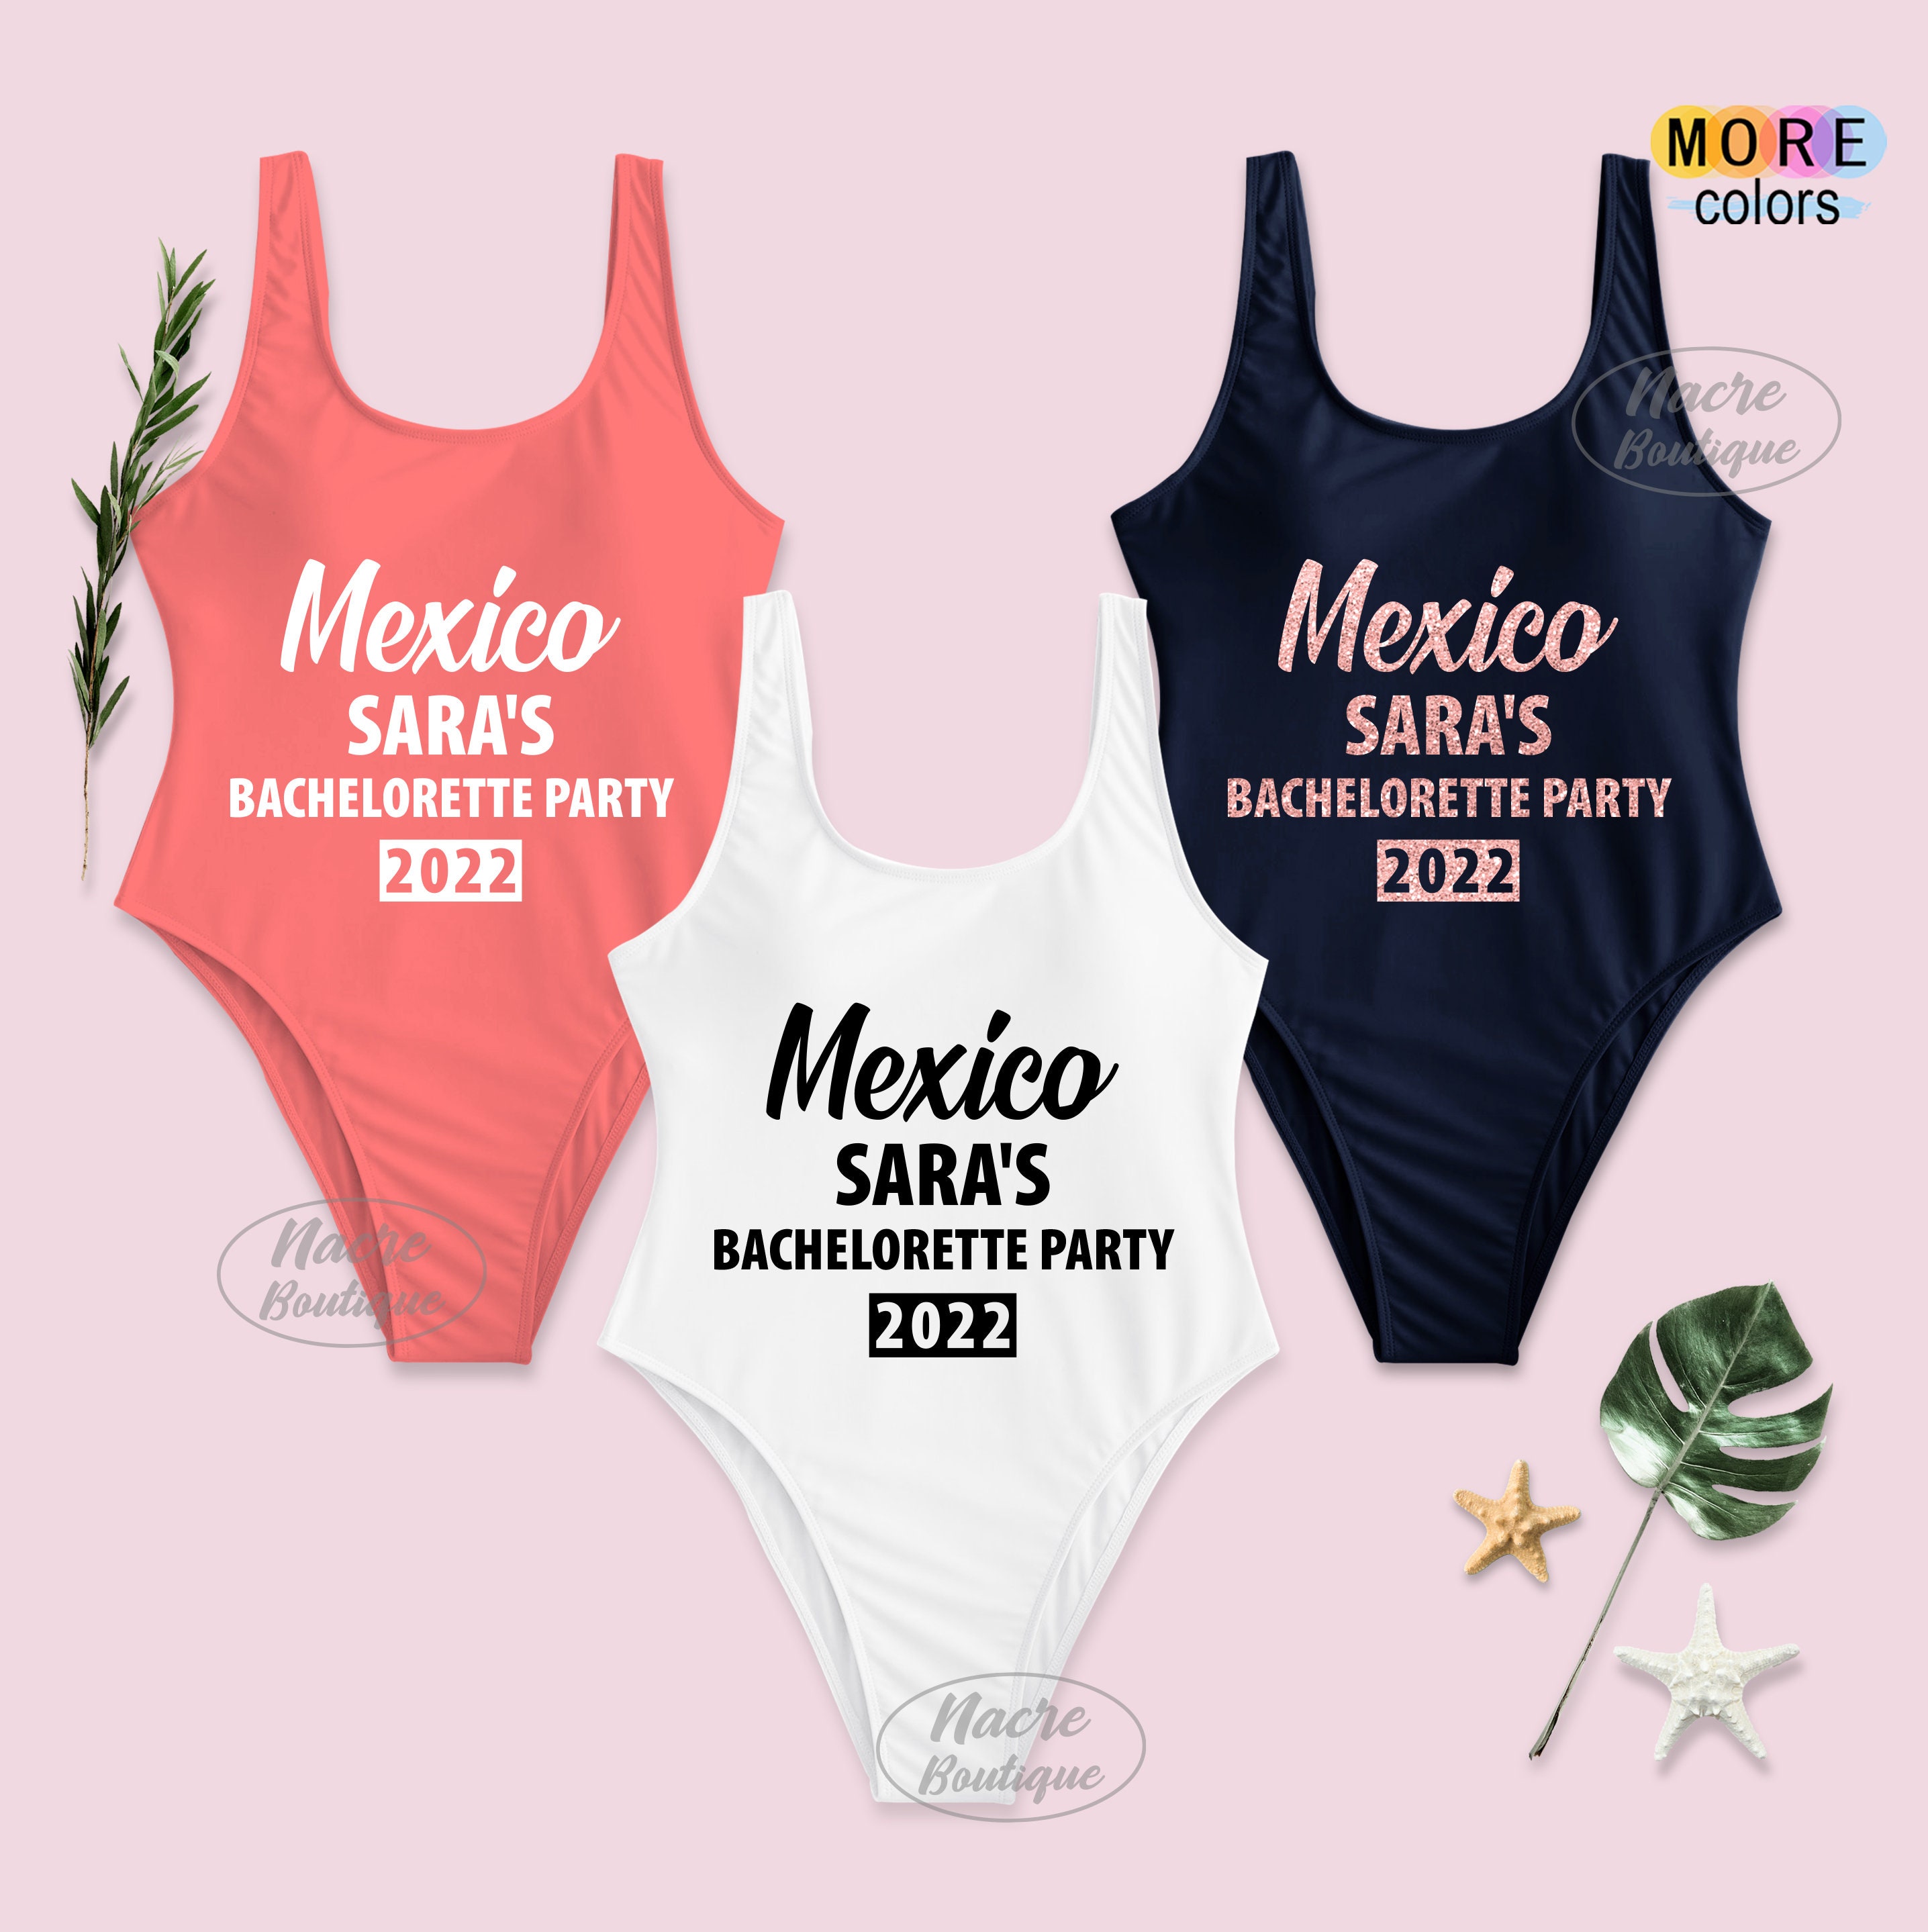 Bridesmaid Proposal Gifts Unique Bathing Suit Colors with Gold Graphics Cat Bride Squad Bachelorette Party High Cut and Low Back One Piece Swimsuit for Bride and Bridesmaids 